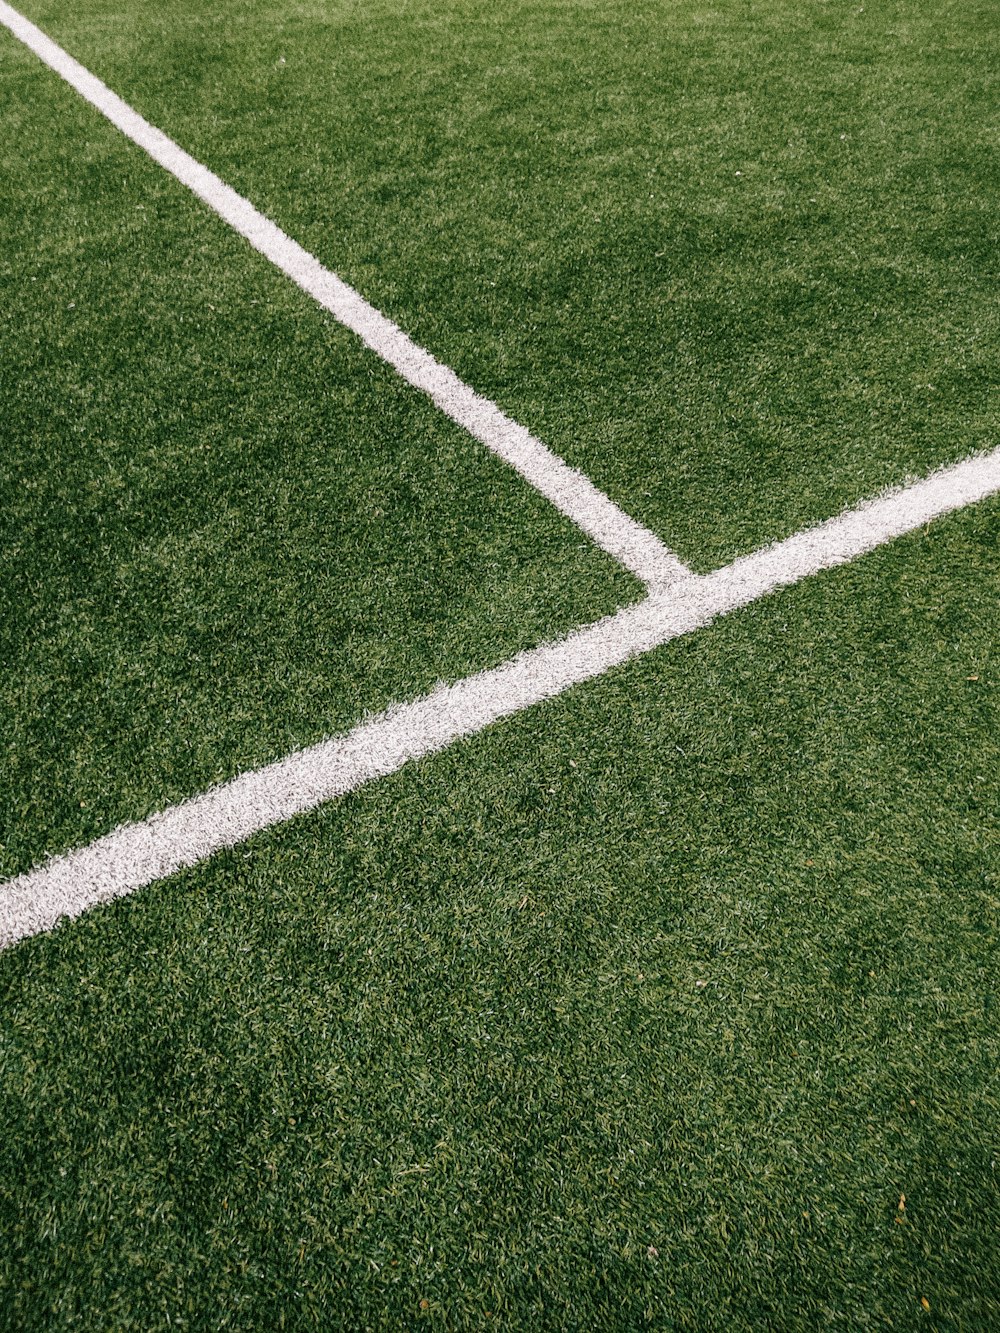 a close up of a white line on a soccer field